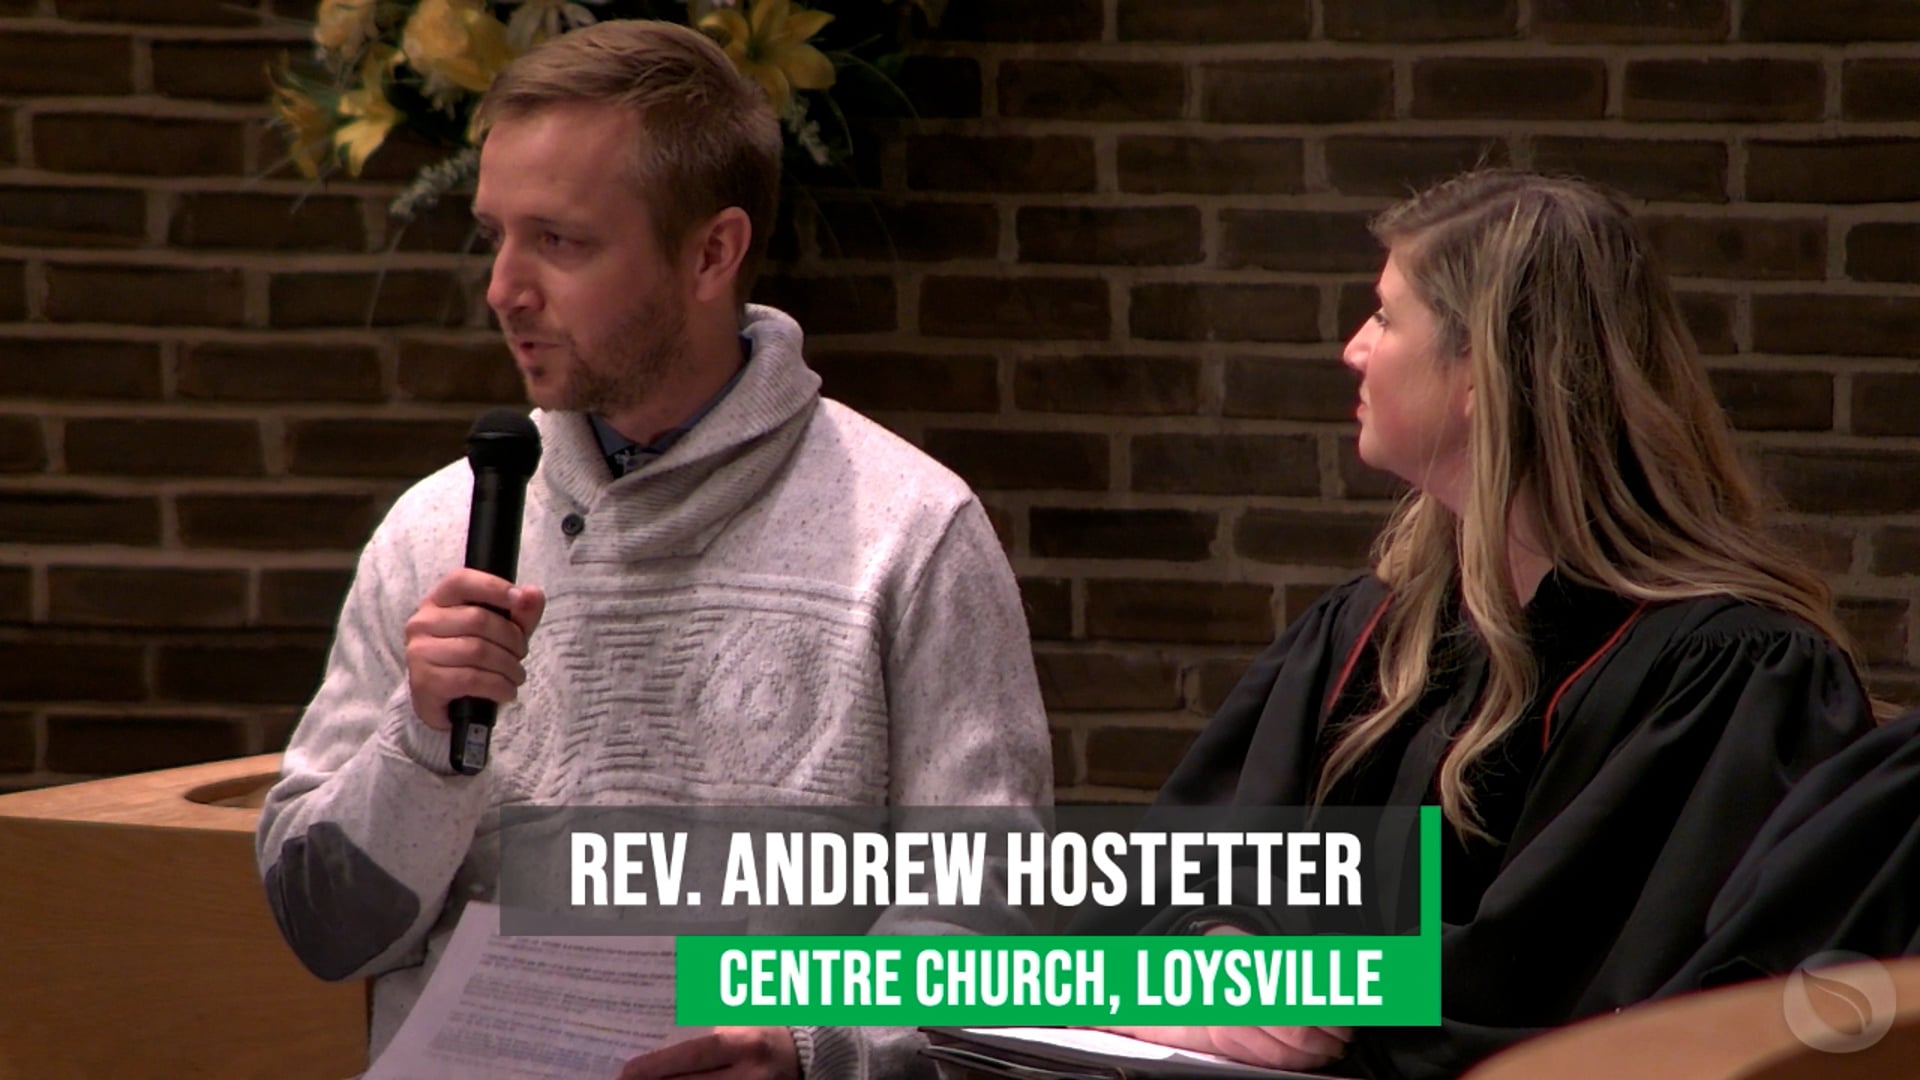 1-23-2022: Stories of Faith: Andrew and Sarah Hostetter